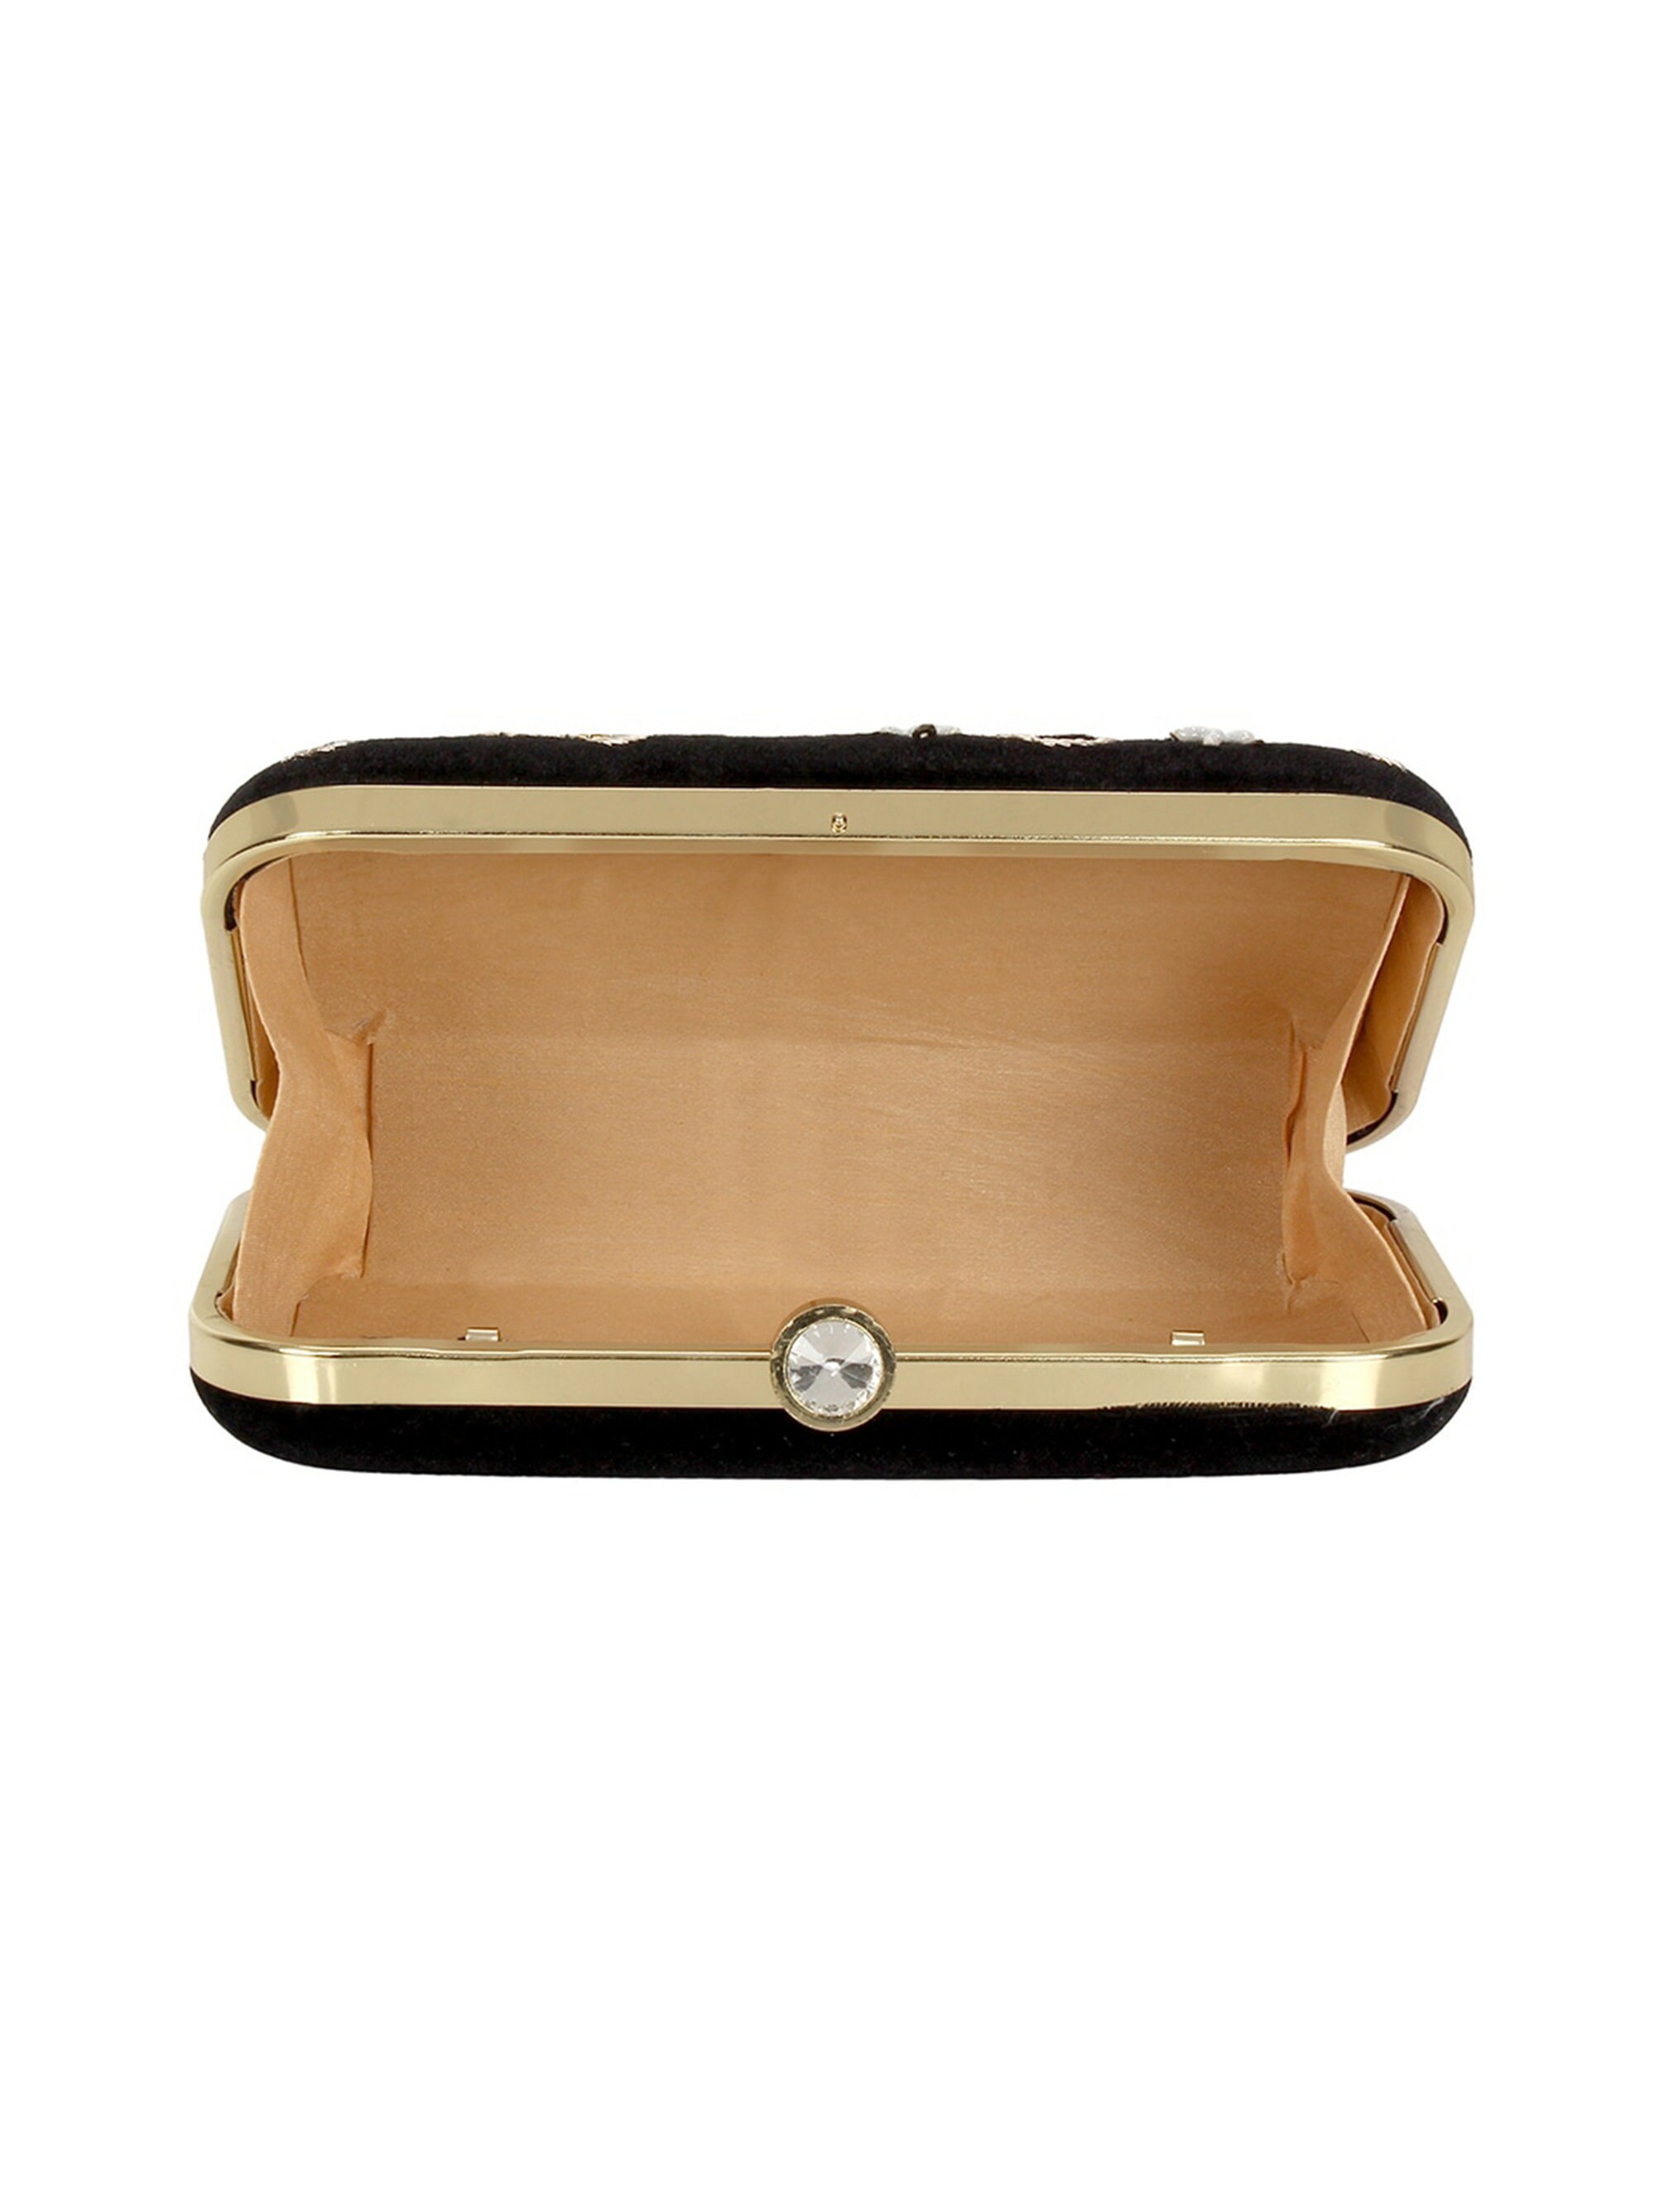 Beaded Embellished Black and Gold Box Clutch 4 Days